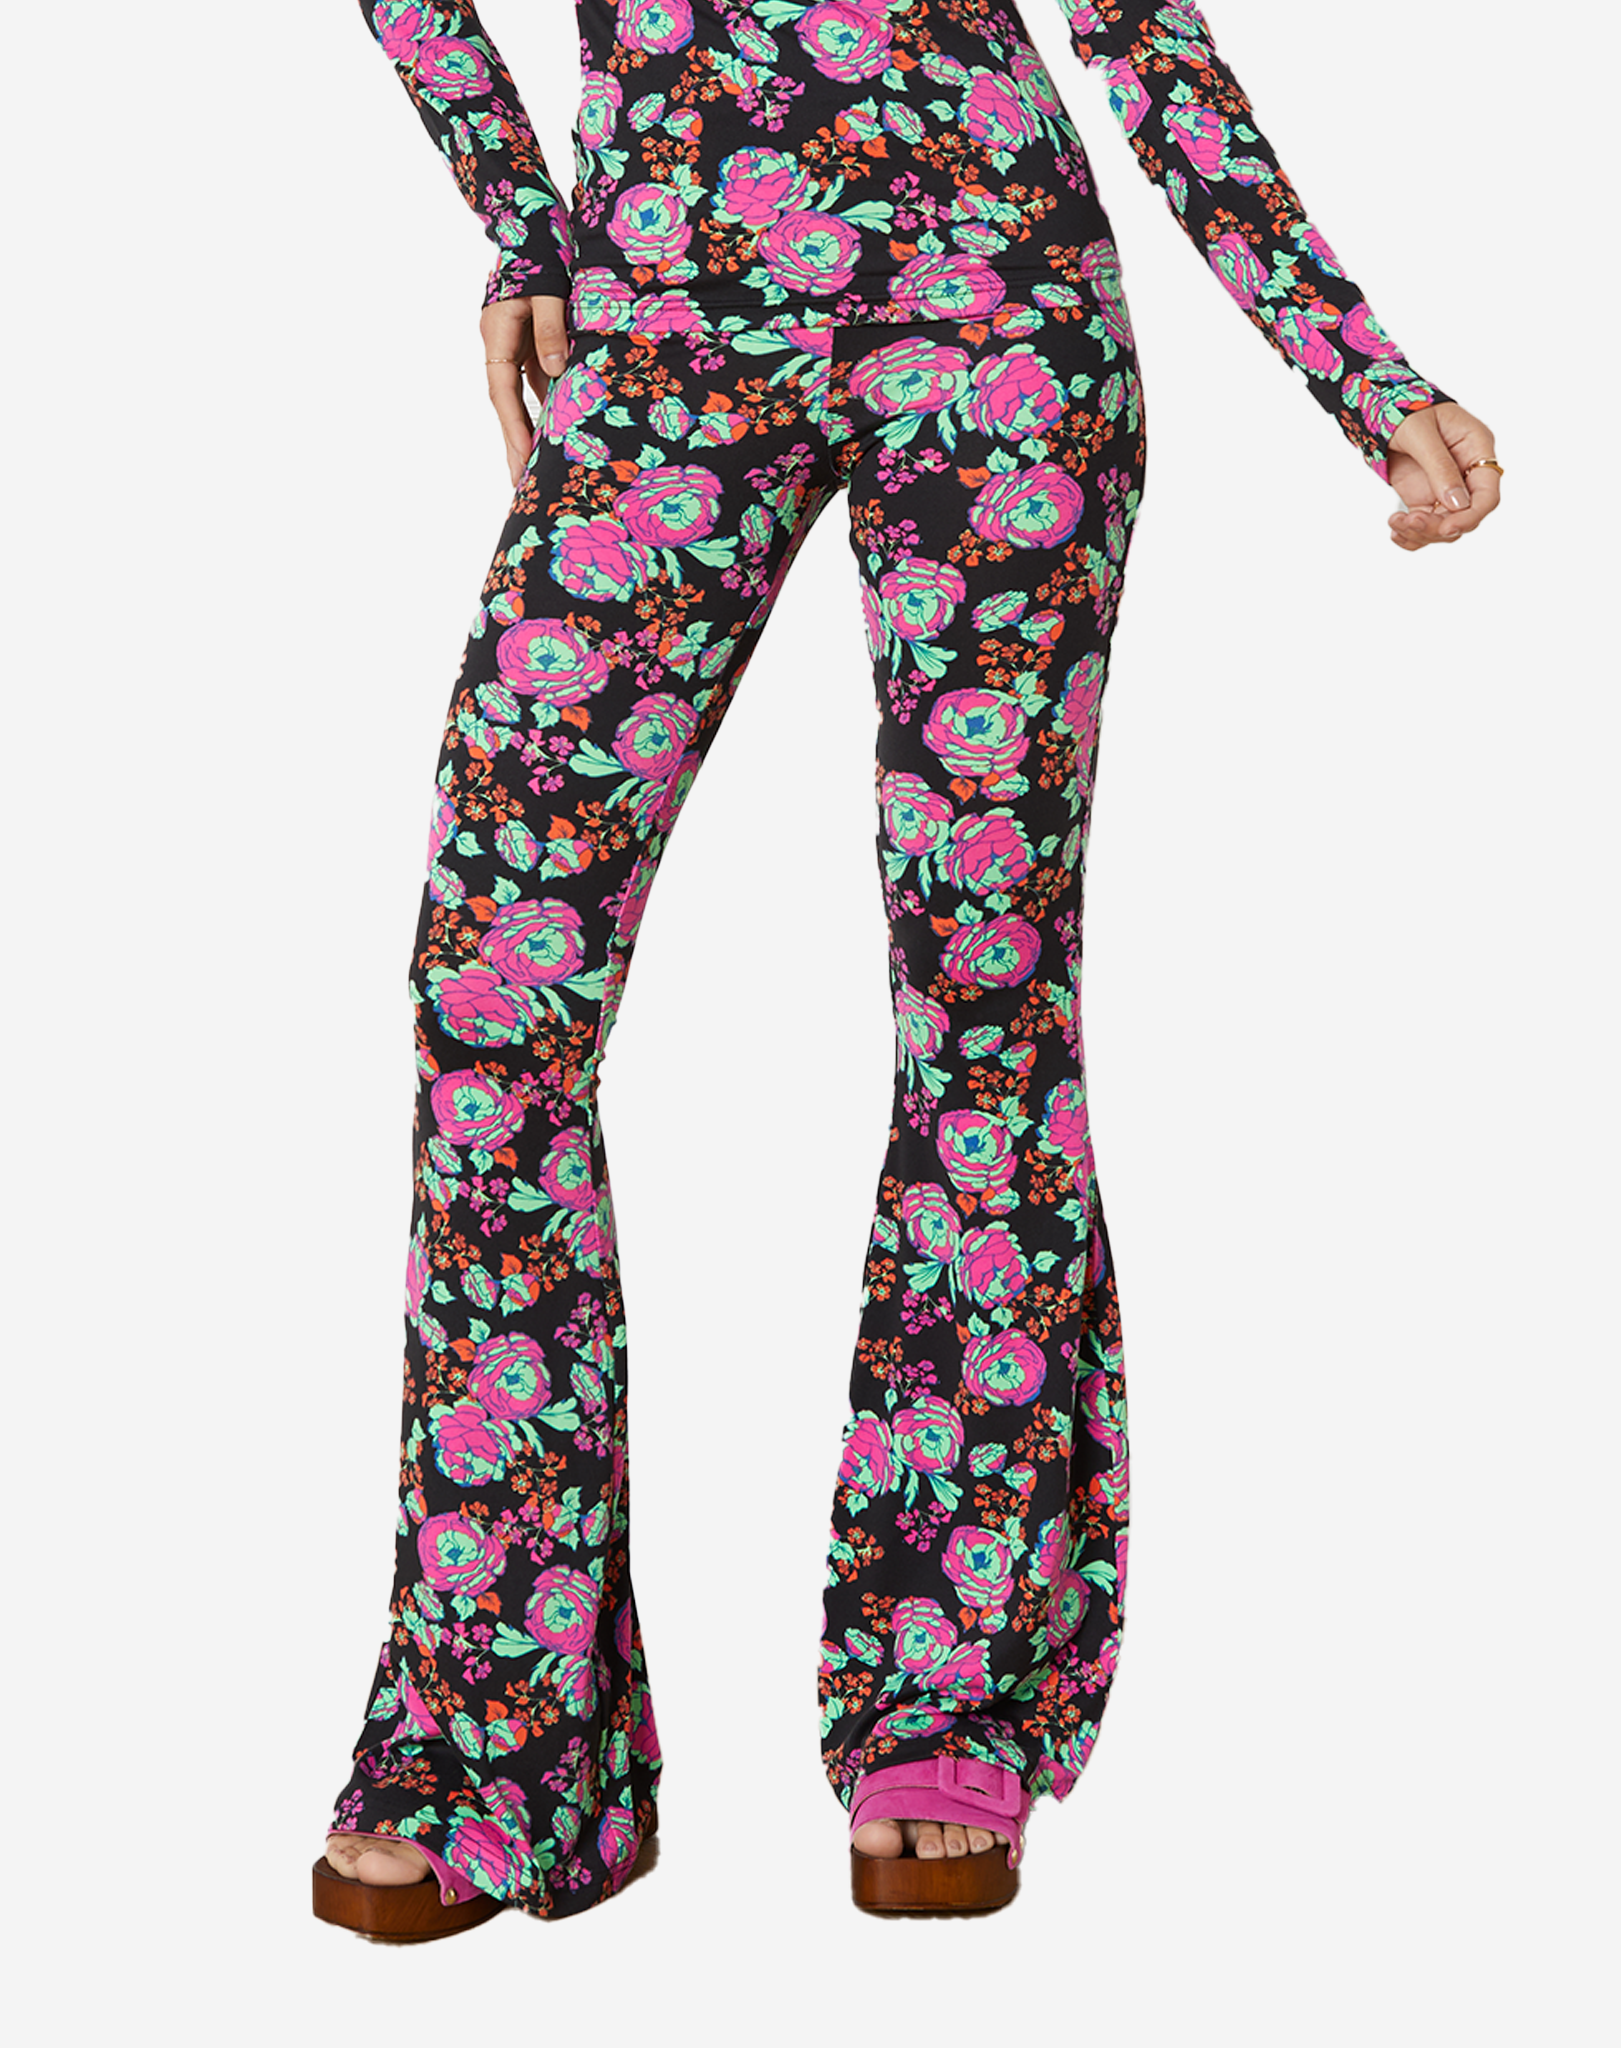 Refined Department Knitted Flower Pants Abba